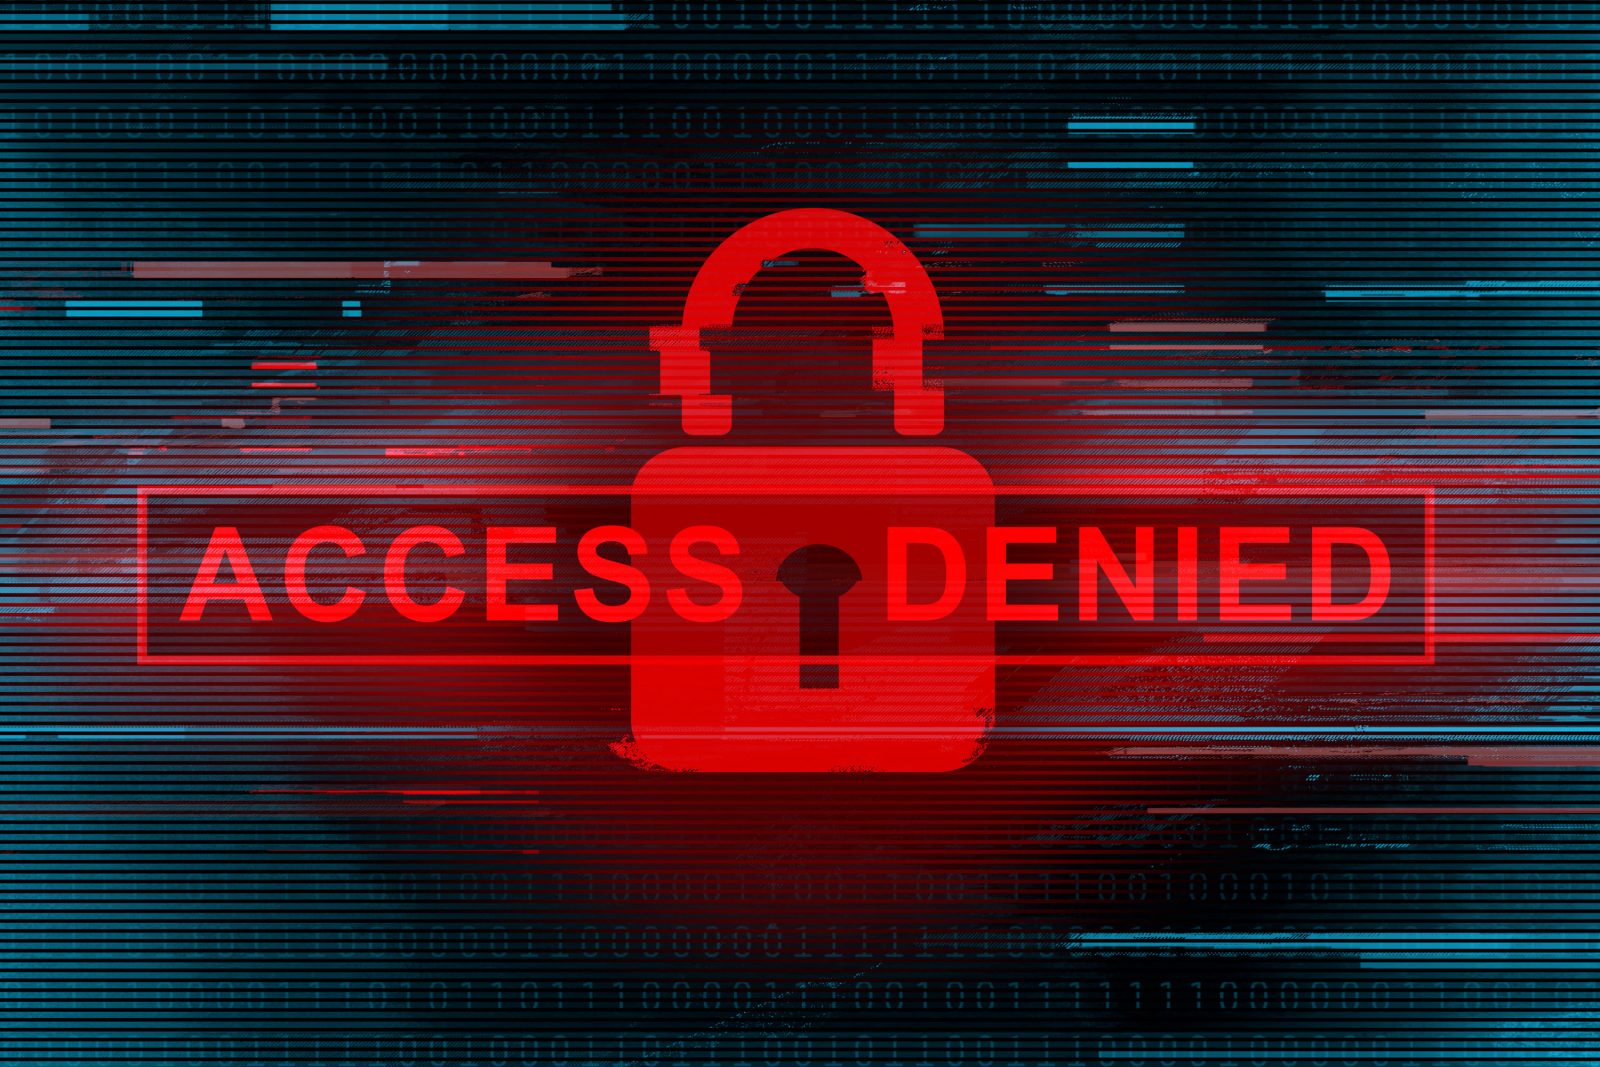 An illustrated image of a red lock with the words 'ACCESS DENIED' written over top. The background appears to be a glitching computer screen.